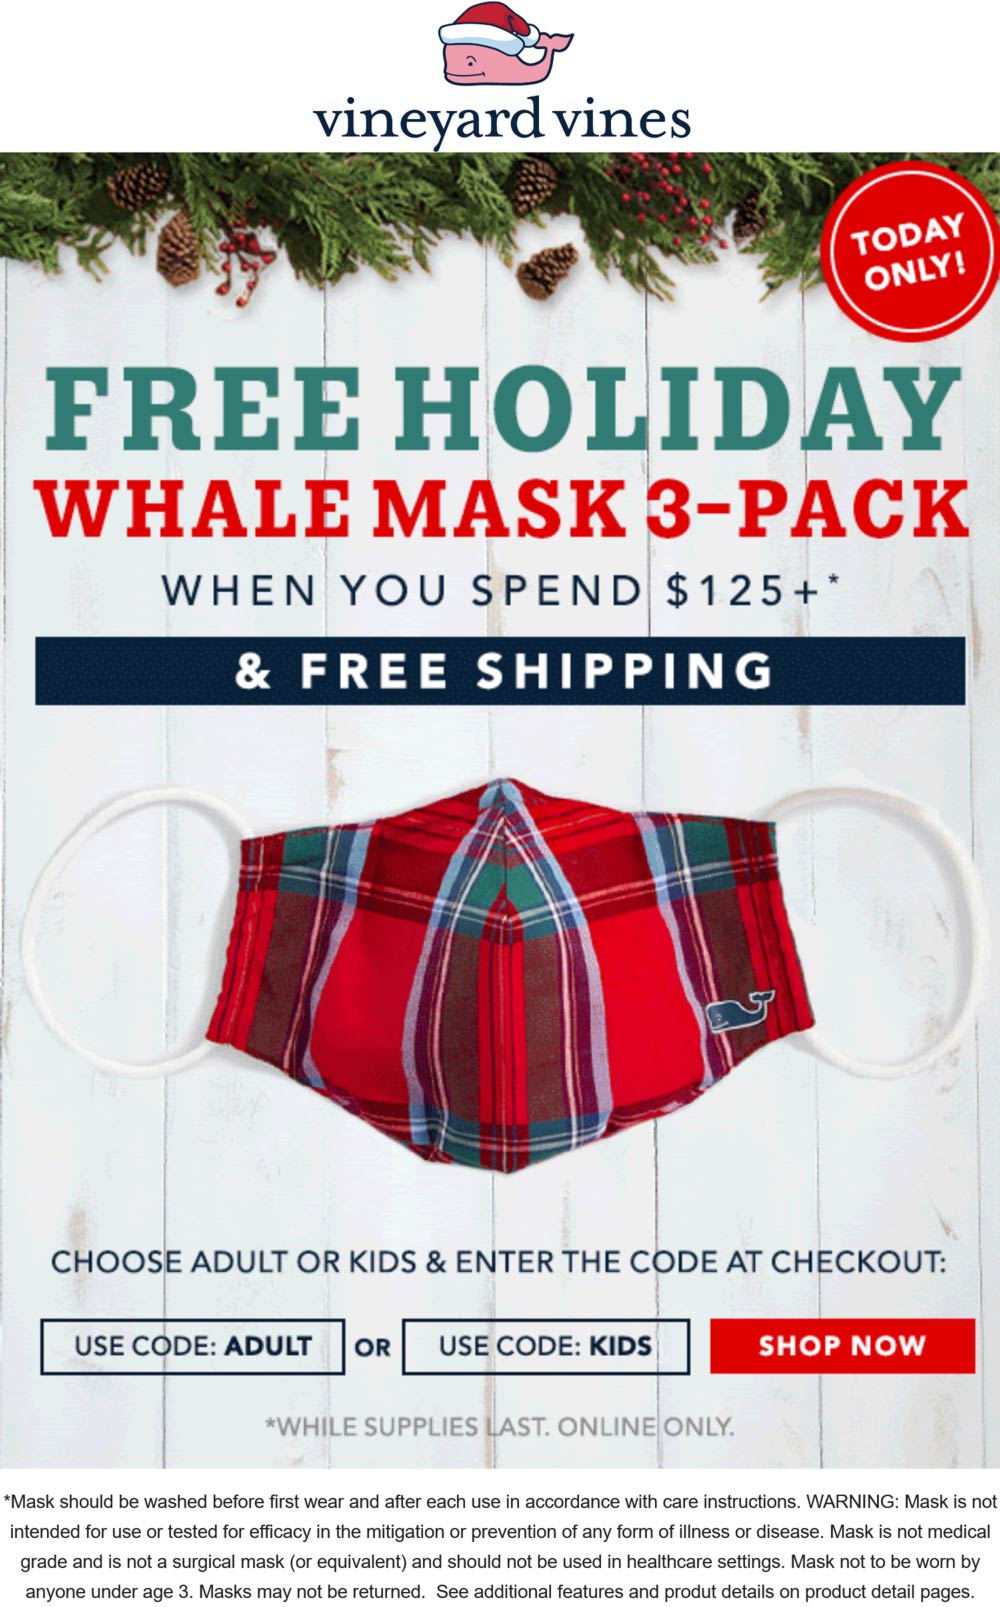 Vineyard Vines stores Coupon  Free 3pack whale masks with $125 spent today at Vineyard Vines via promo code ADULT or KIDS #vineyardvines 